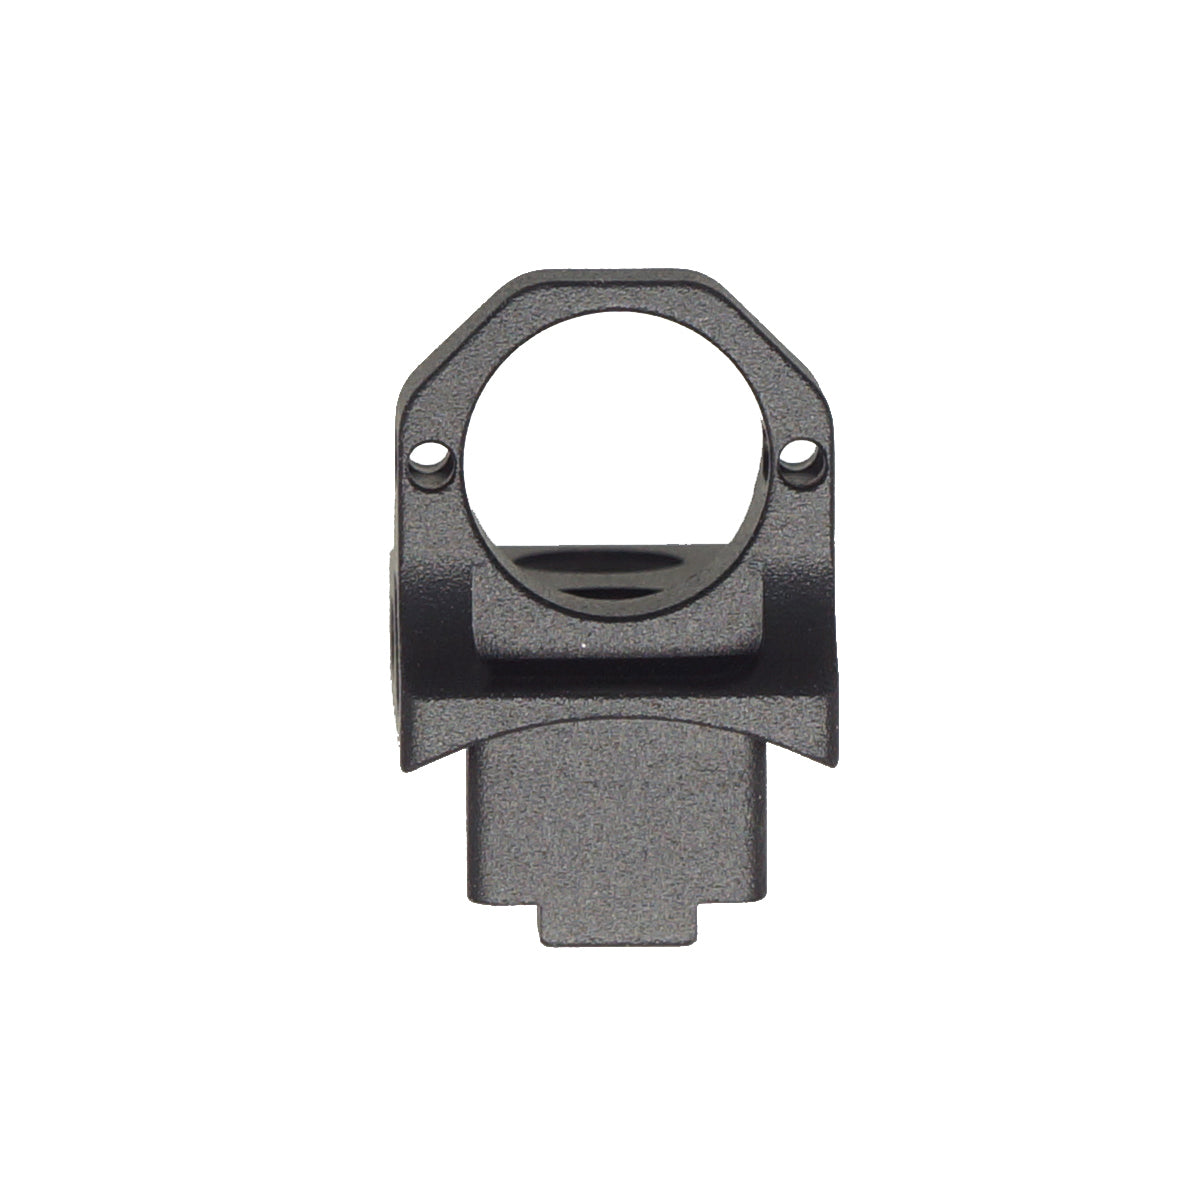 5KU Ghost Ring Sight Set for AAP-01 GBB Pistol ( ABAAP-022 )